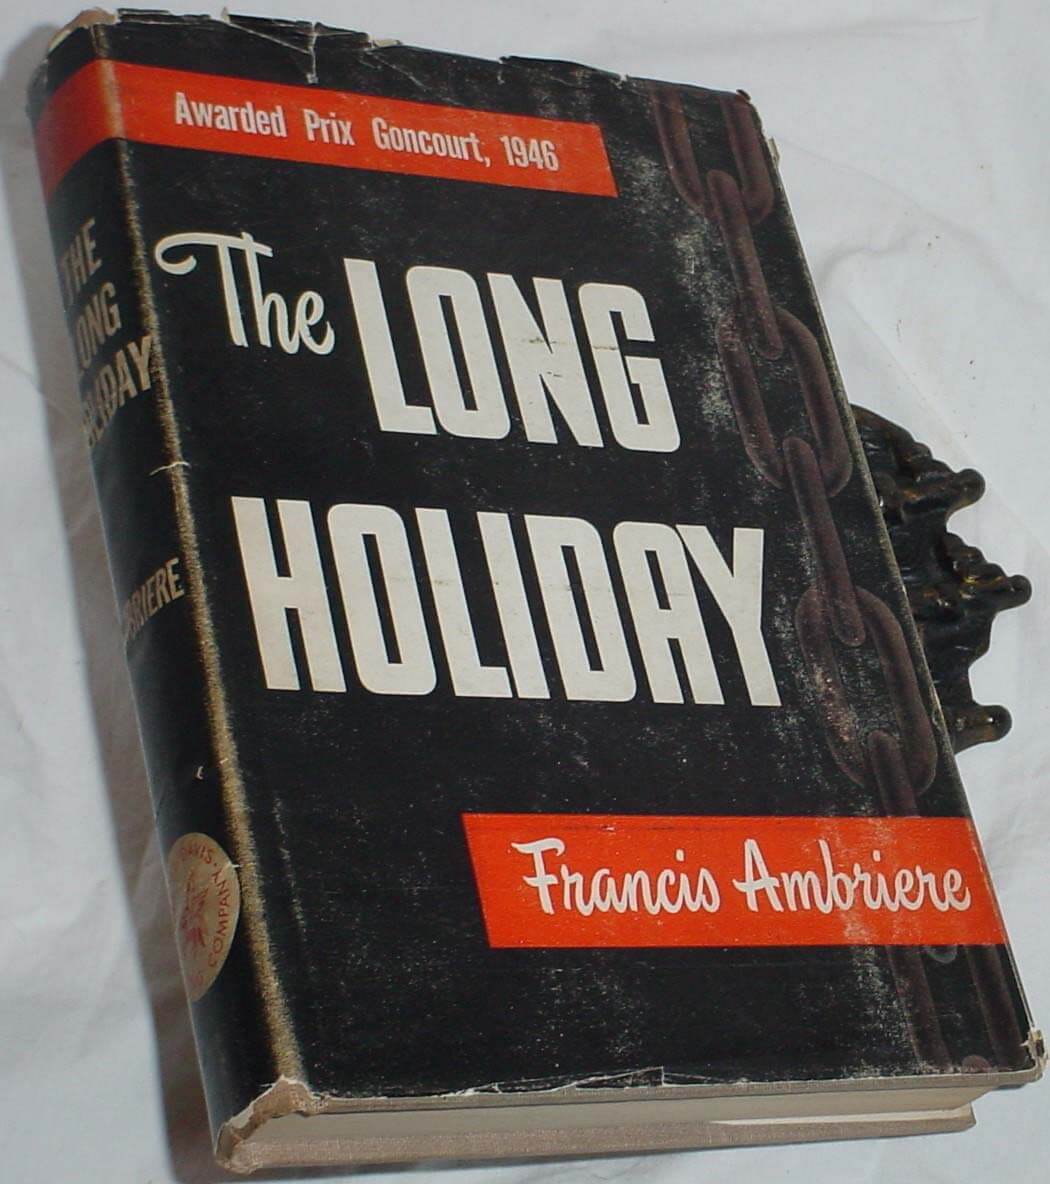 the long holliday